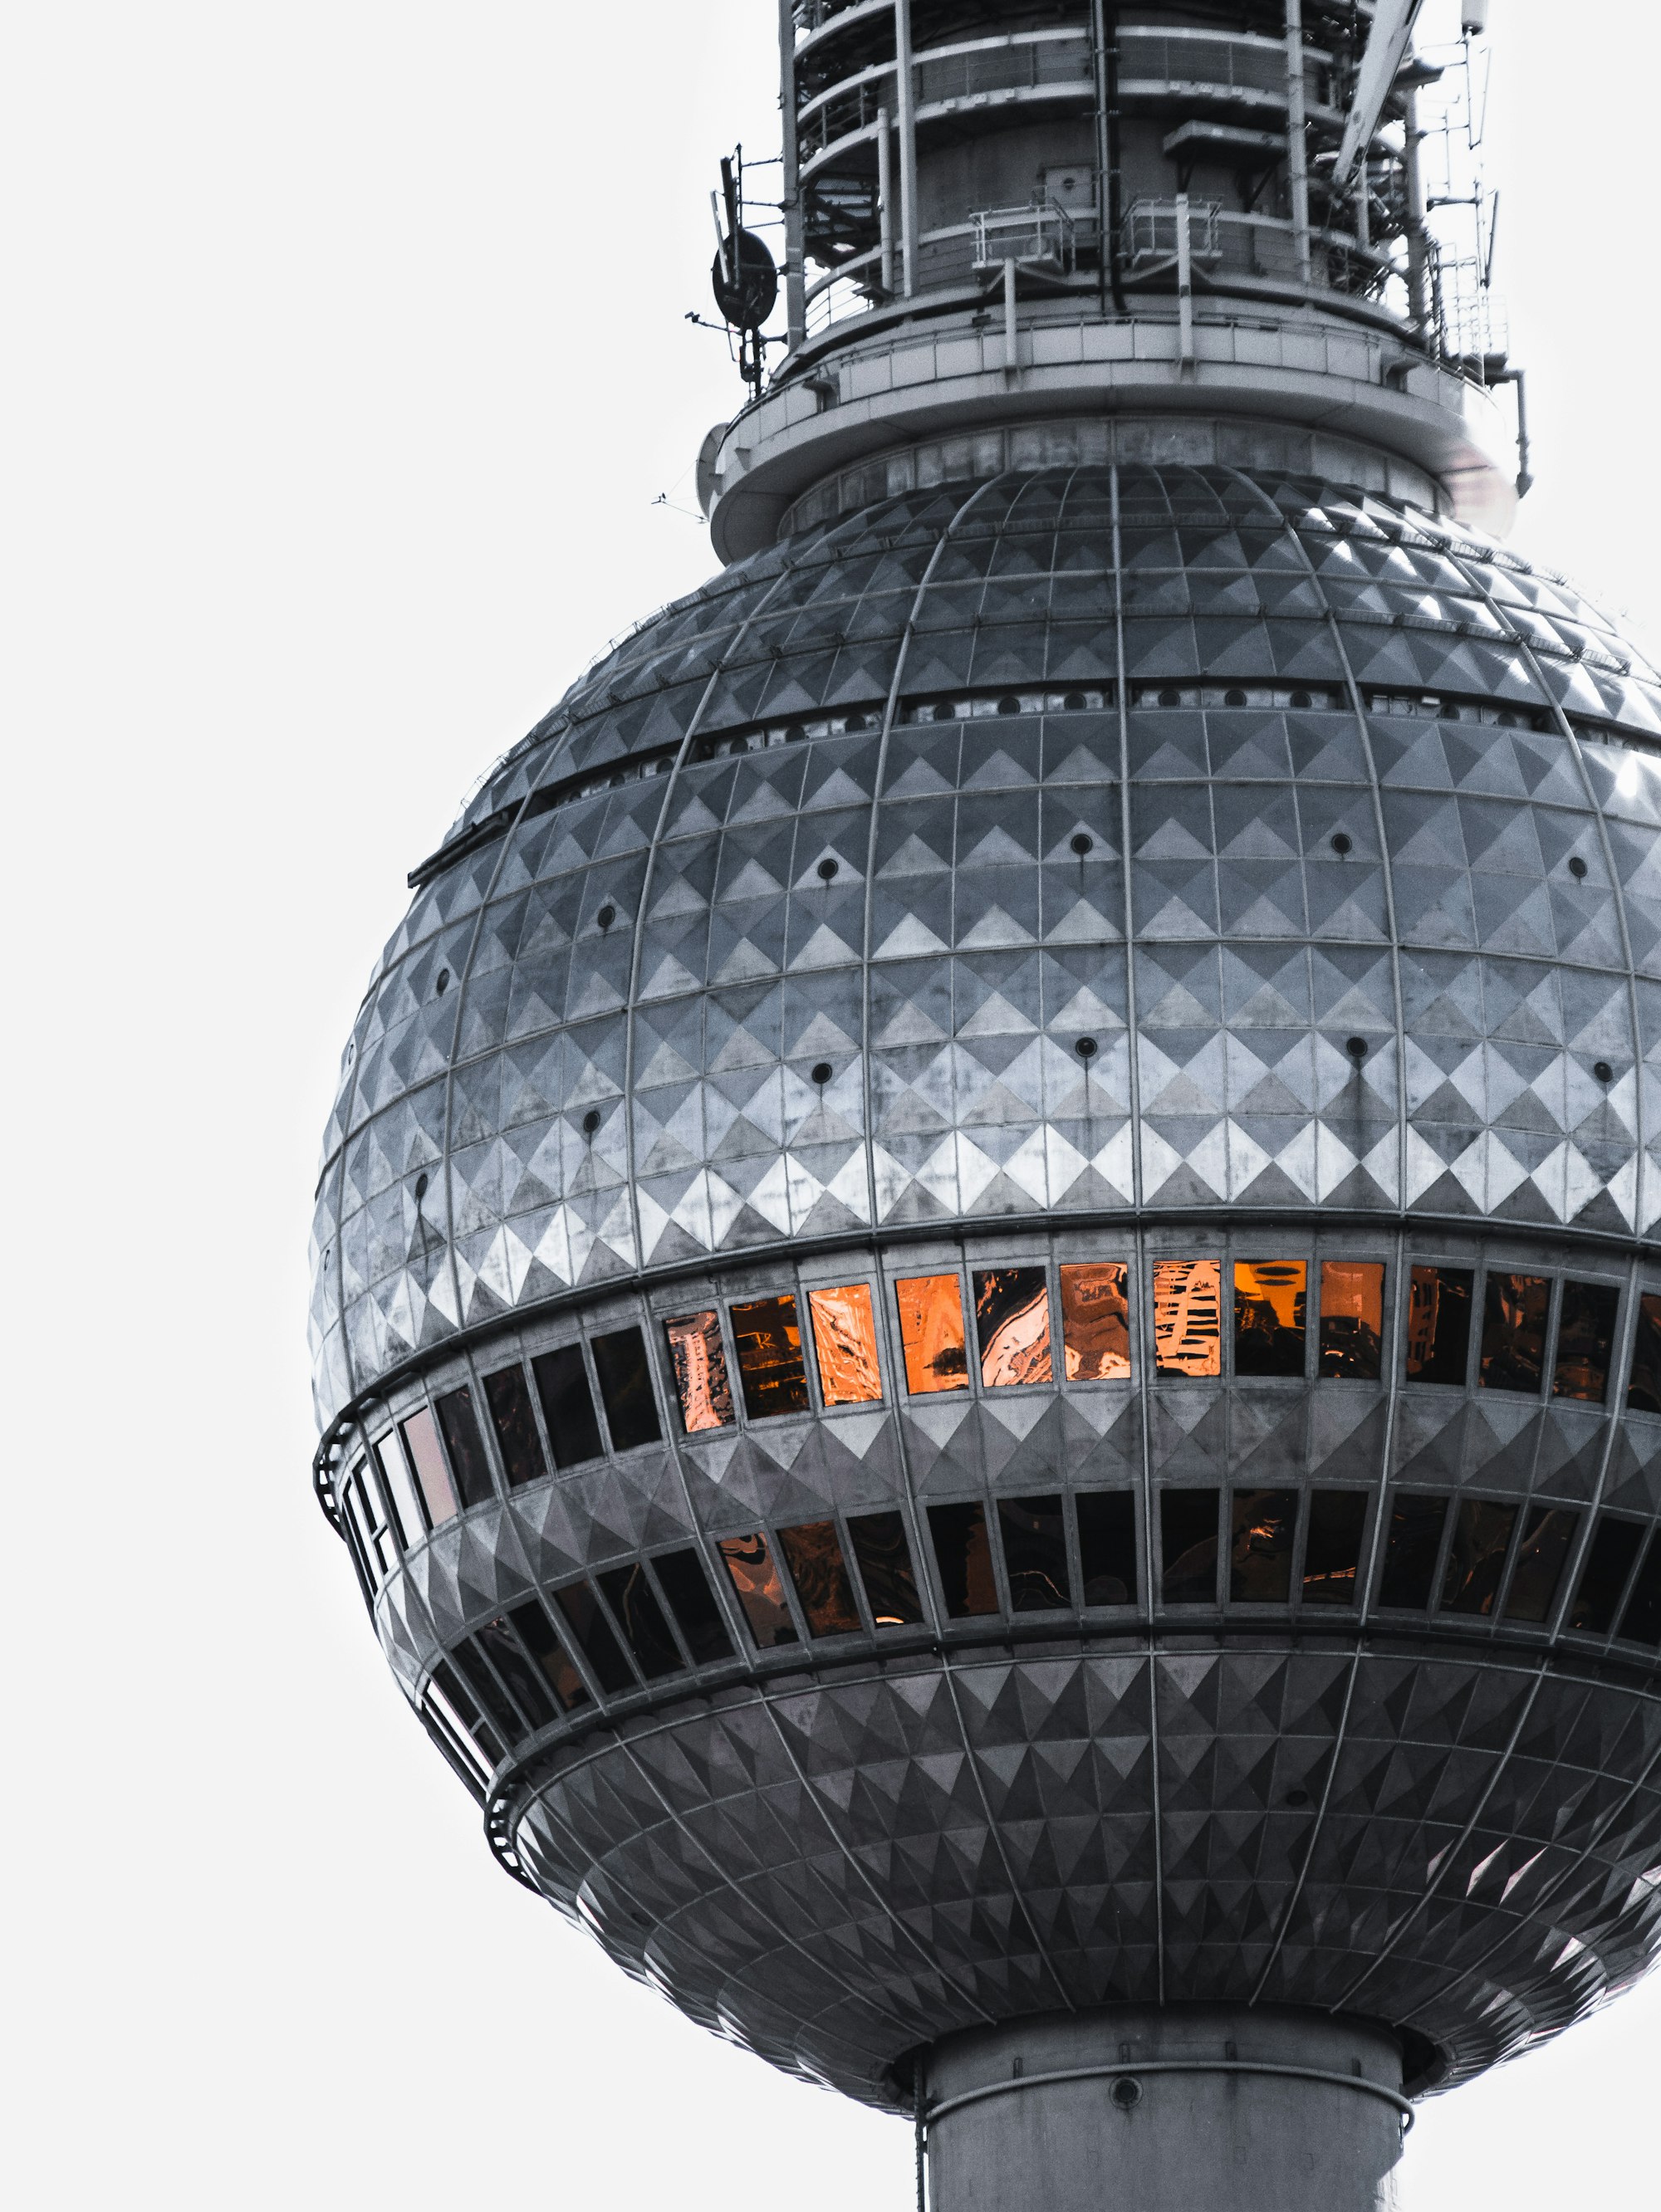 The Berlin Television Tower, one of the most iconic sights of Germany and always worth a visit.